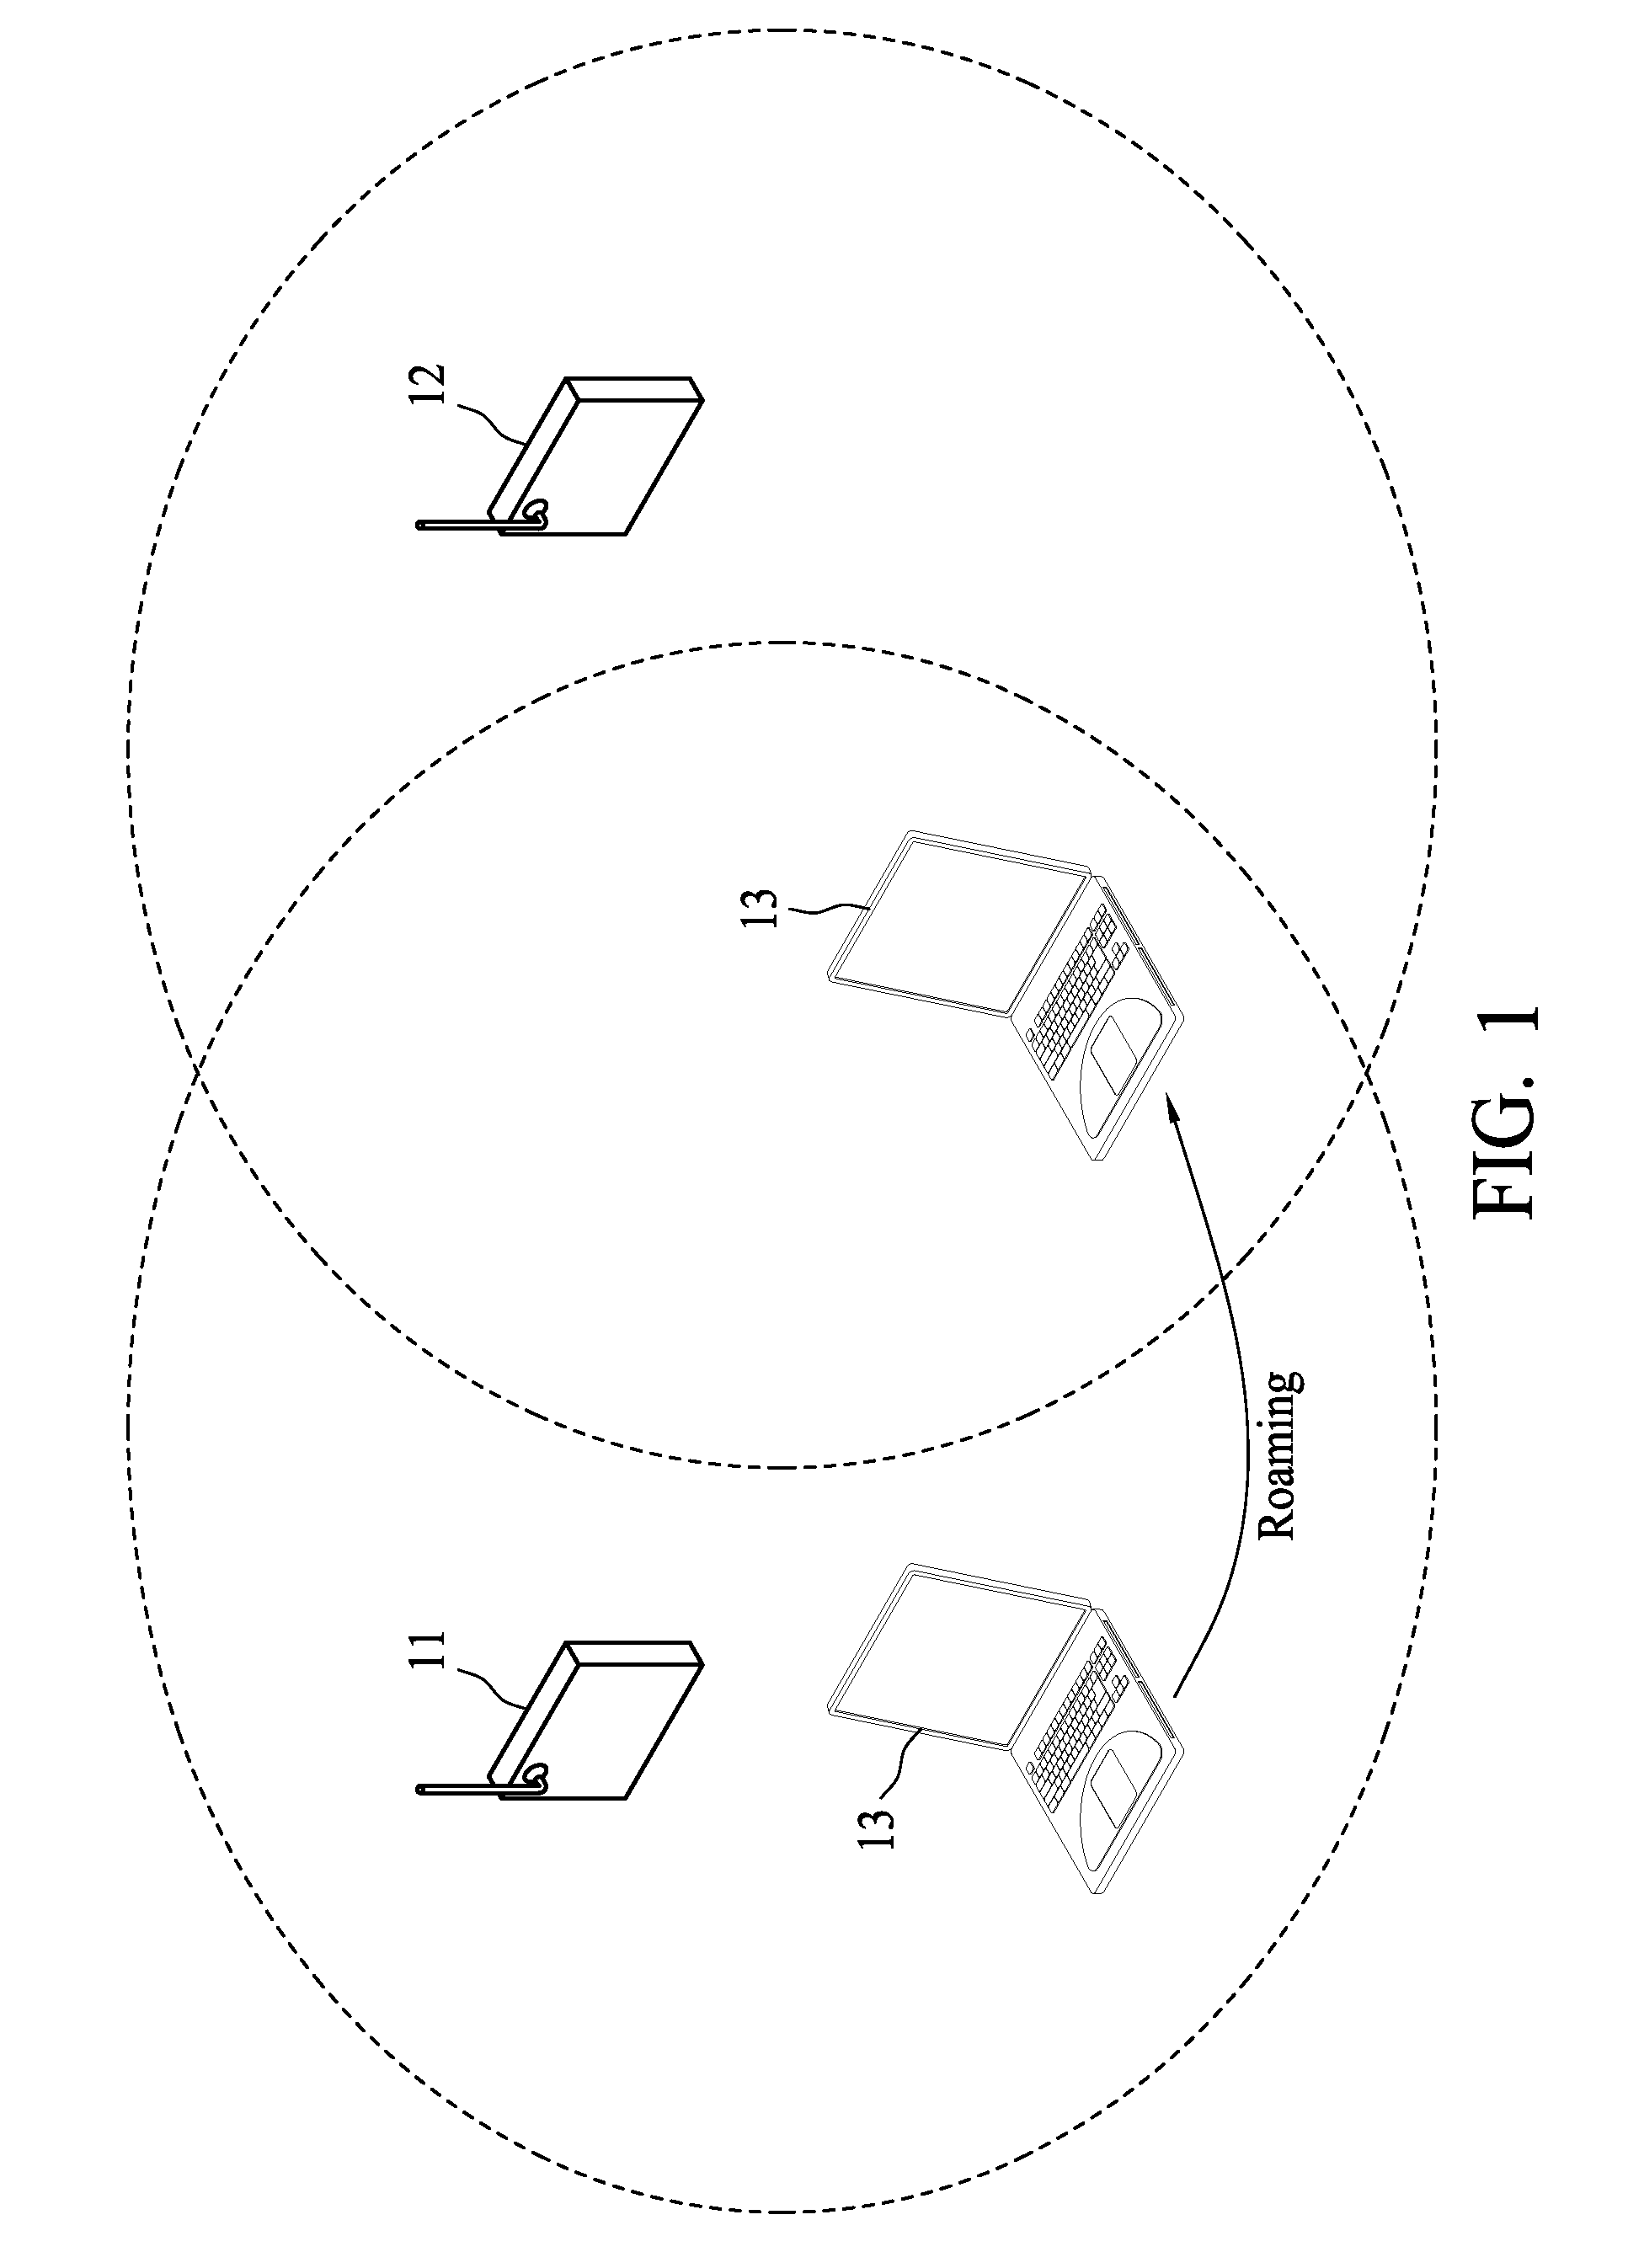 Method and apparatus for scanning channels in wireless local area network